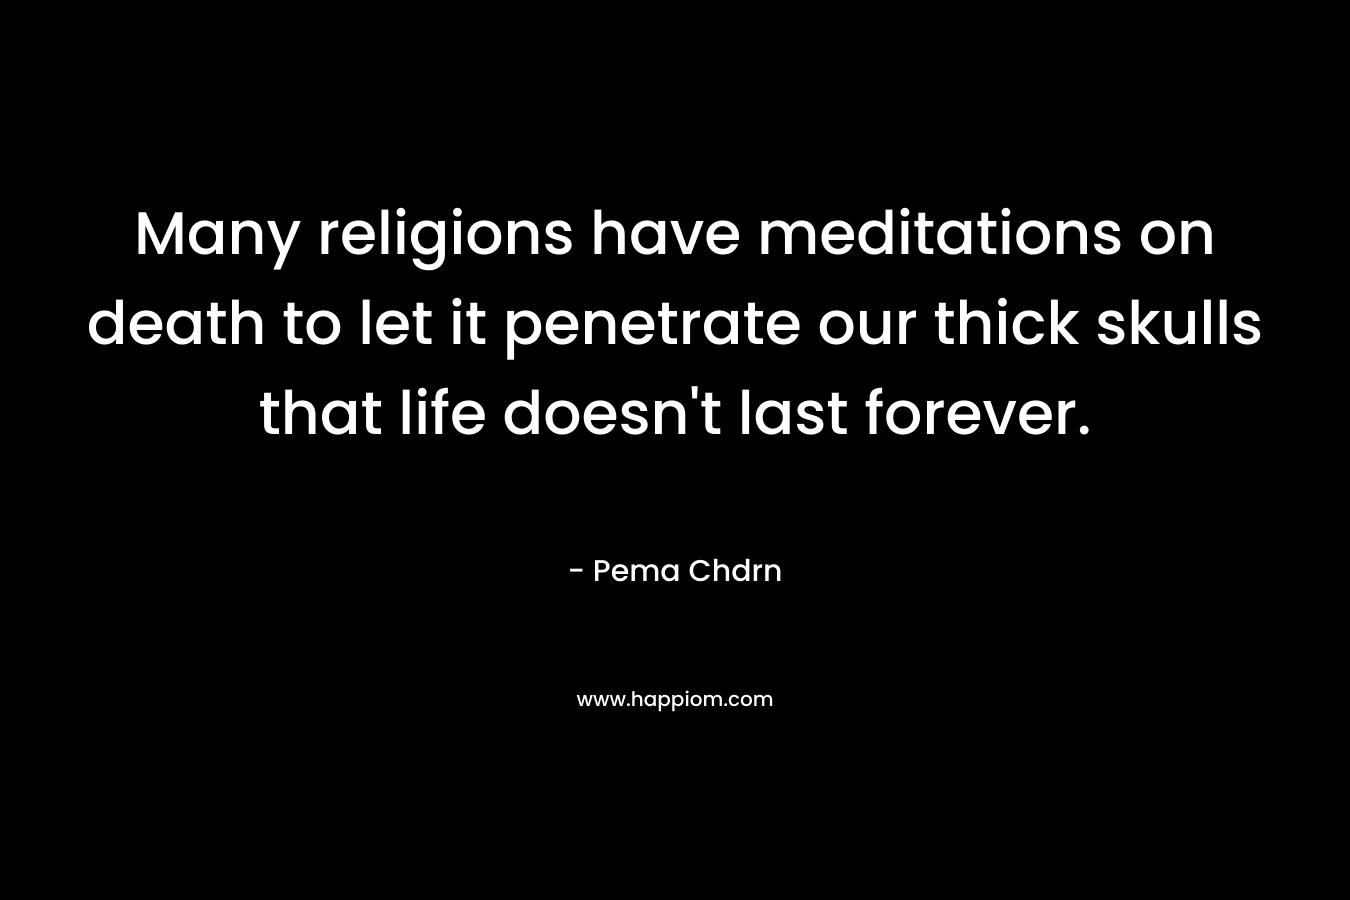 Many religions have meditations on death to let it penetrate our thick skulls that life doesn’t last forever. – Pema Chdrn